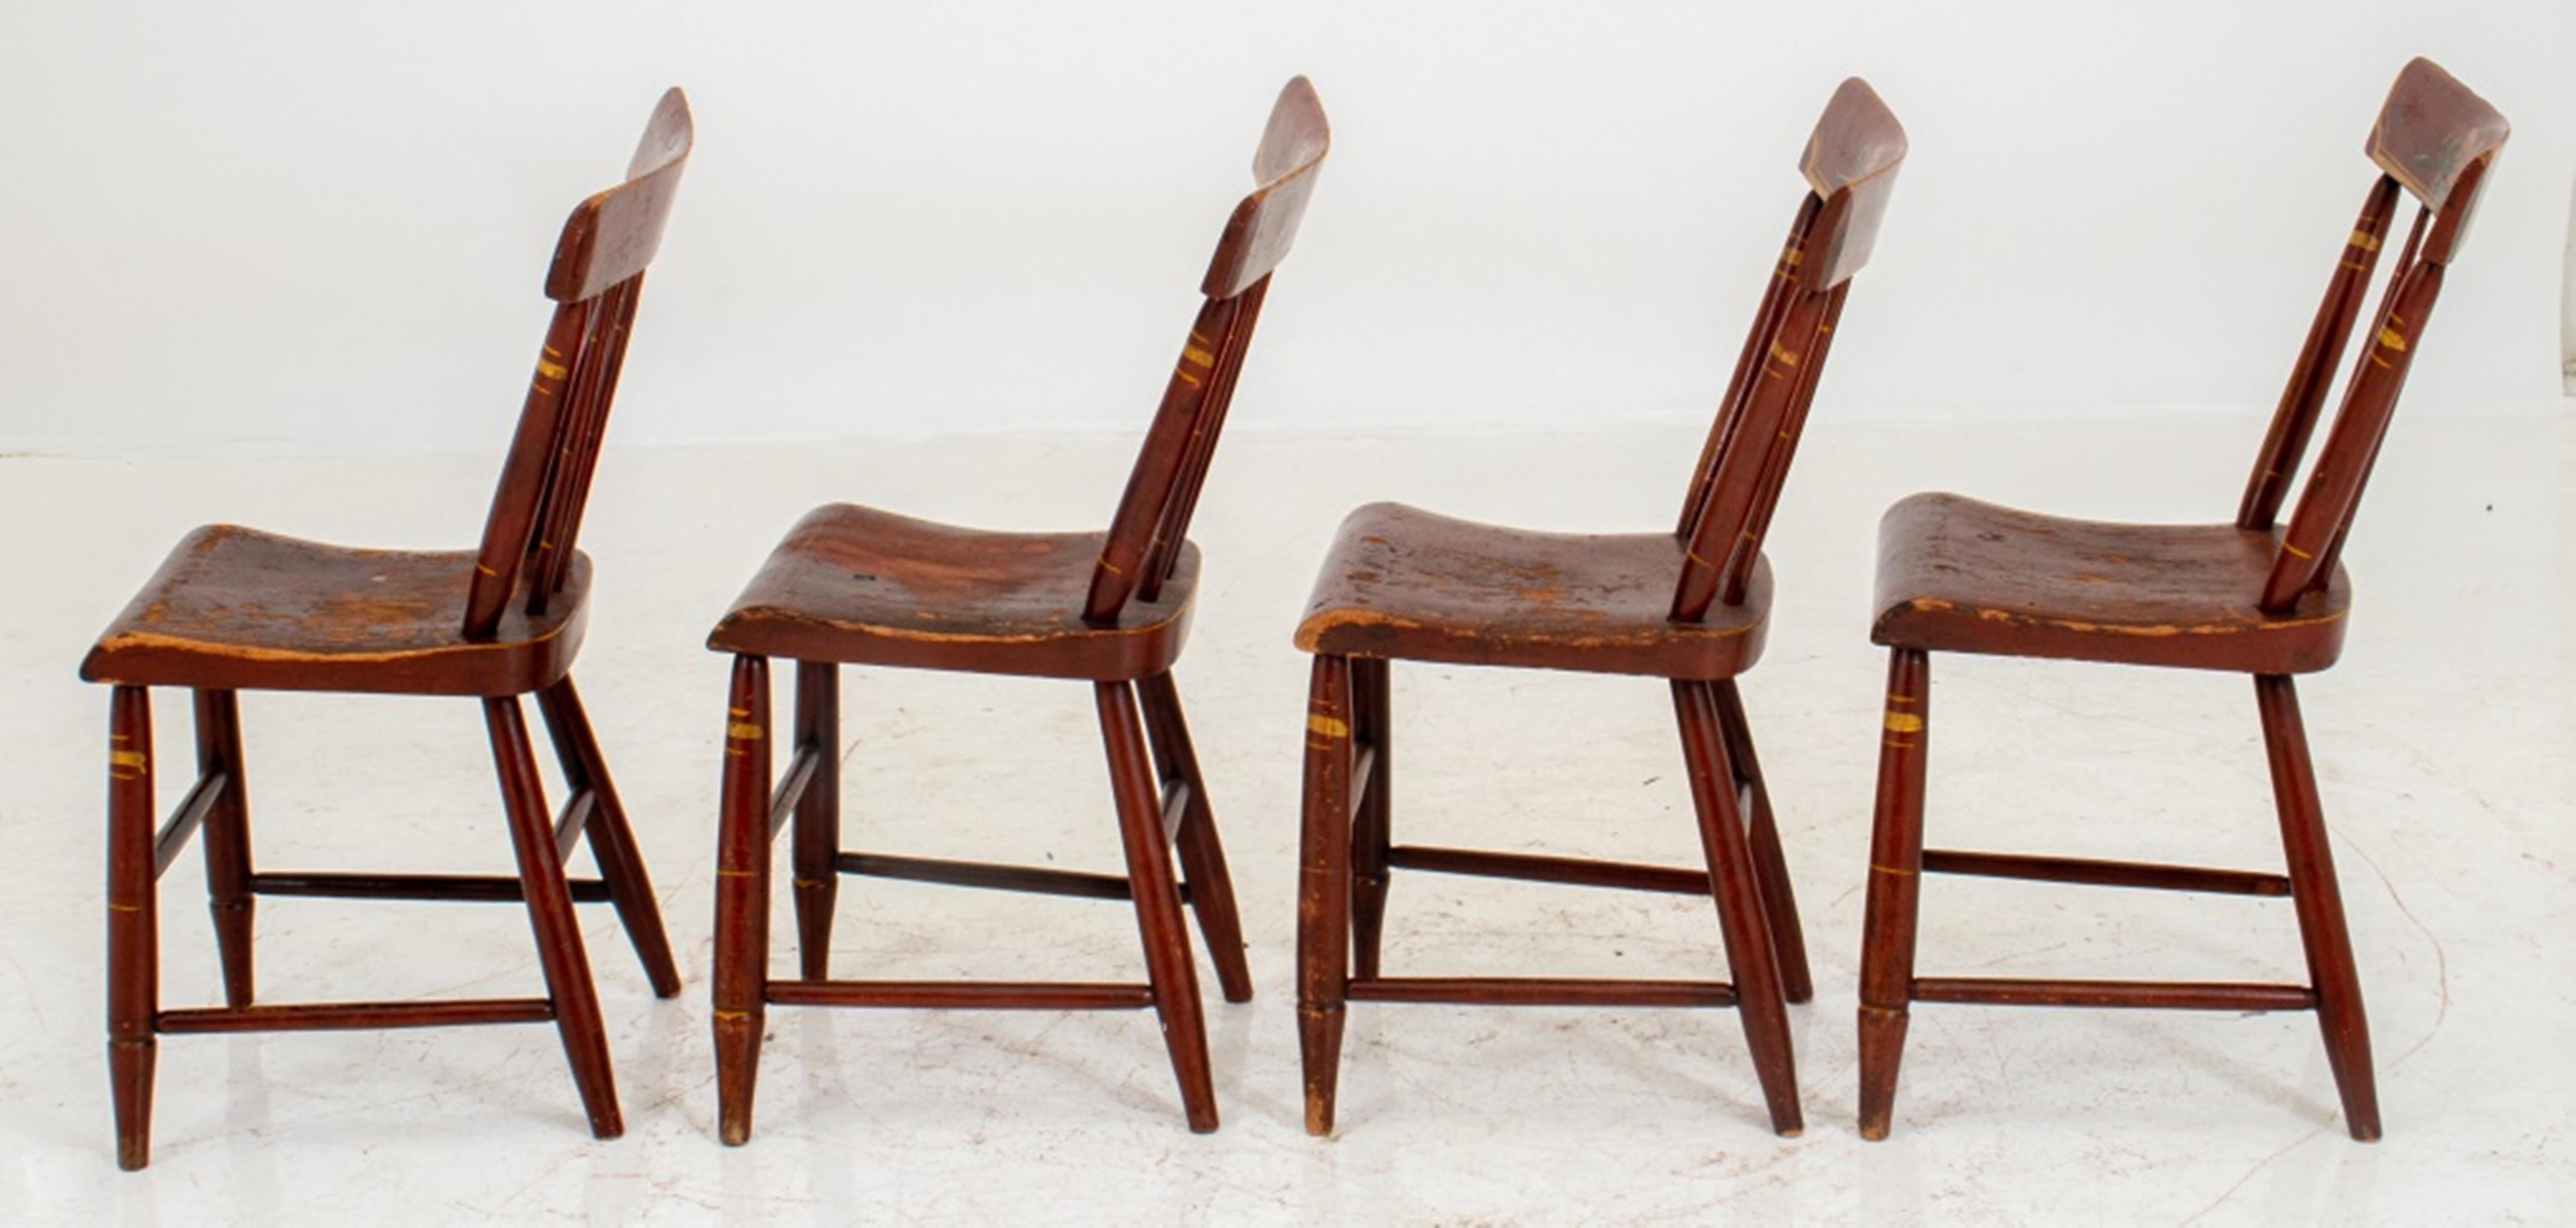 American Folk Art Style chairs, four (4), each with rectangular backrest, red painted ,and with floral motifs above two dowel supports and three turned splats, the shaped seat similarly painted and on four turned legs with stretchers. Measures: 31